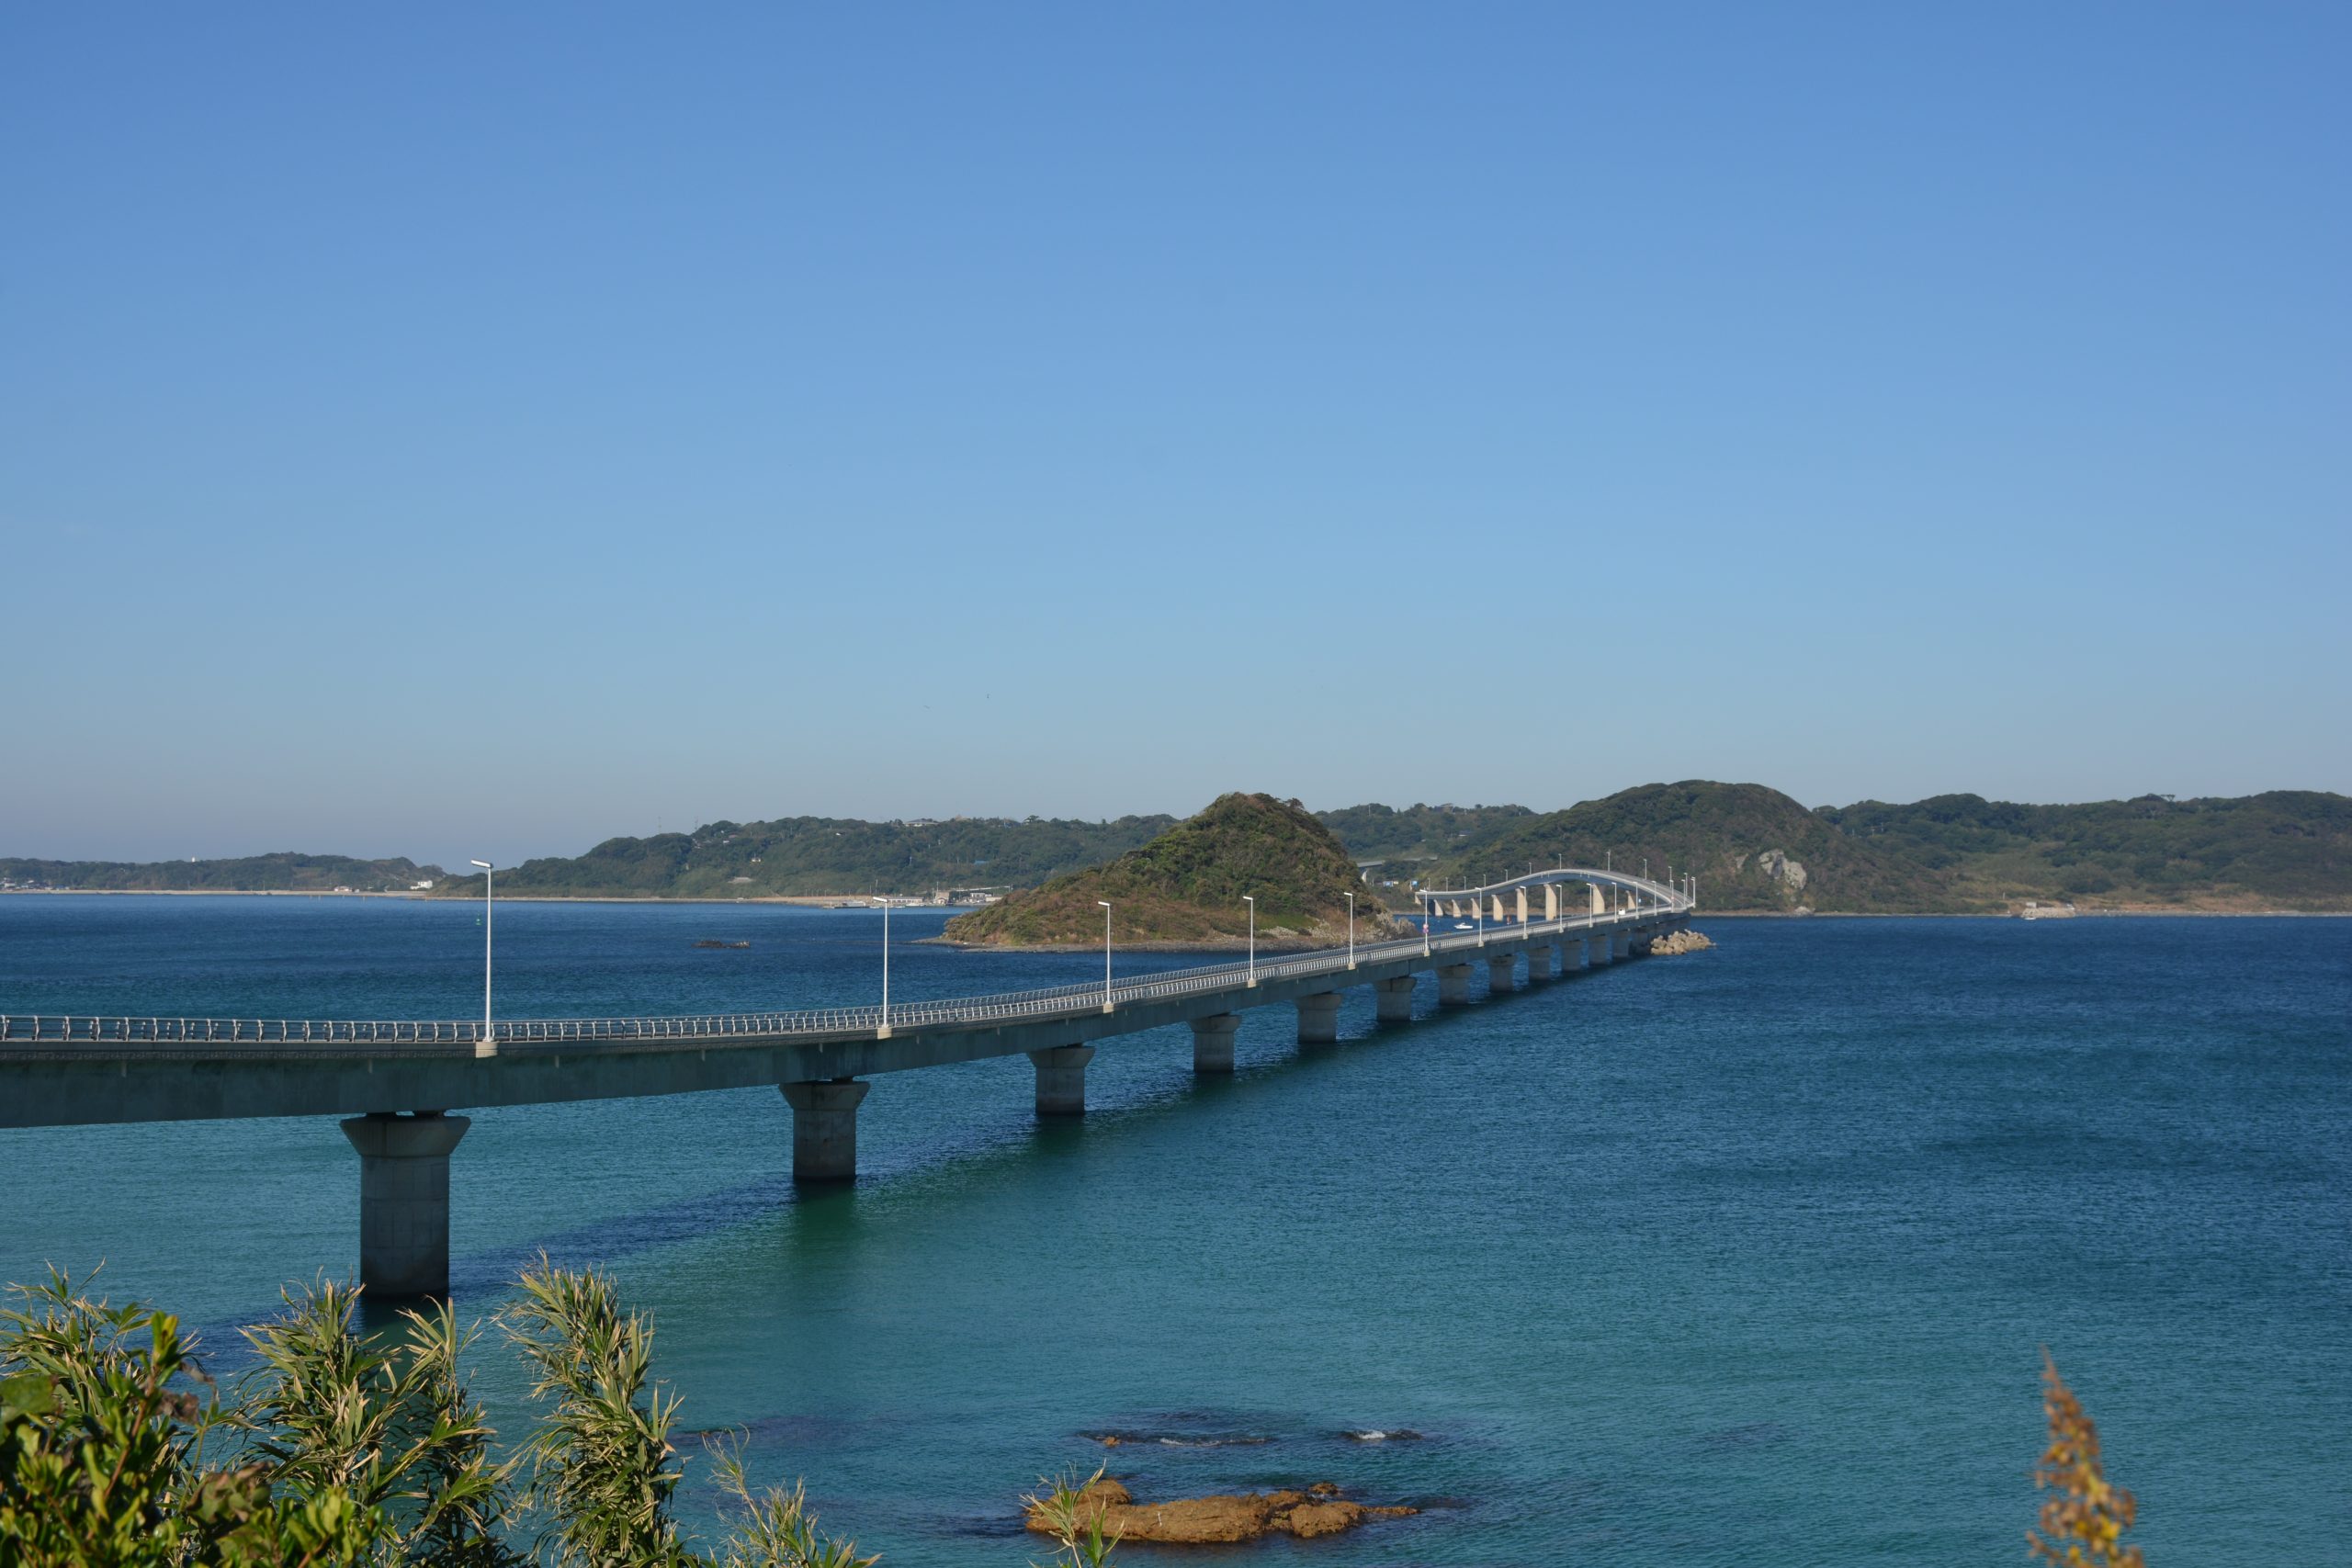 Things to Do in Yamaguchi Prefecture: Top Attractions & Activities